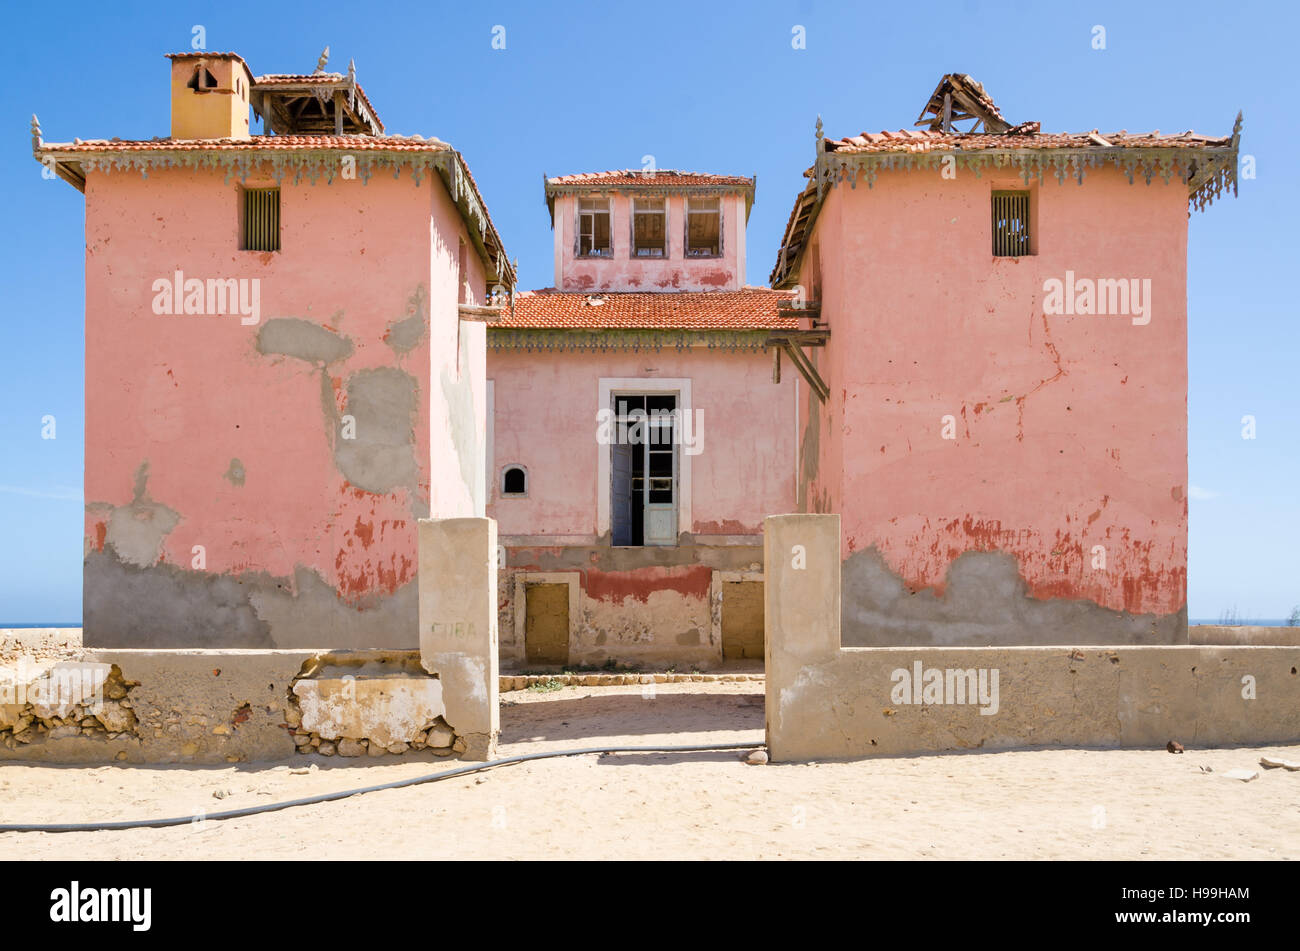 Large pink ruined mansion from Portuguese colonial times in small coastal village of Angola's Namib Desert. Stock Photo